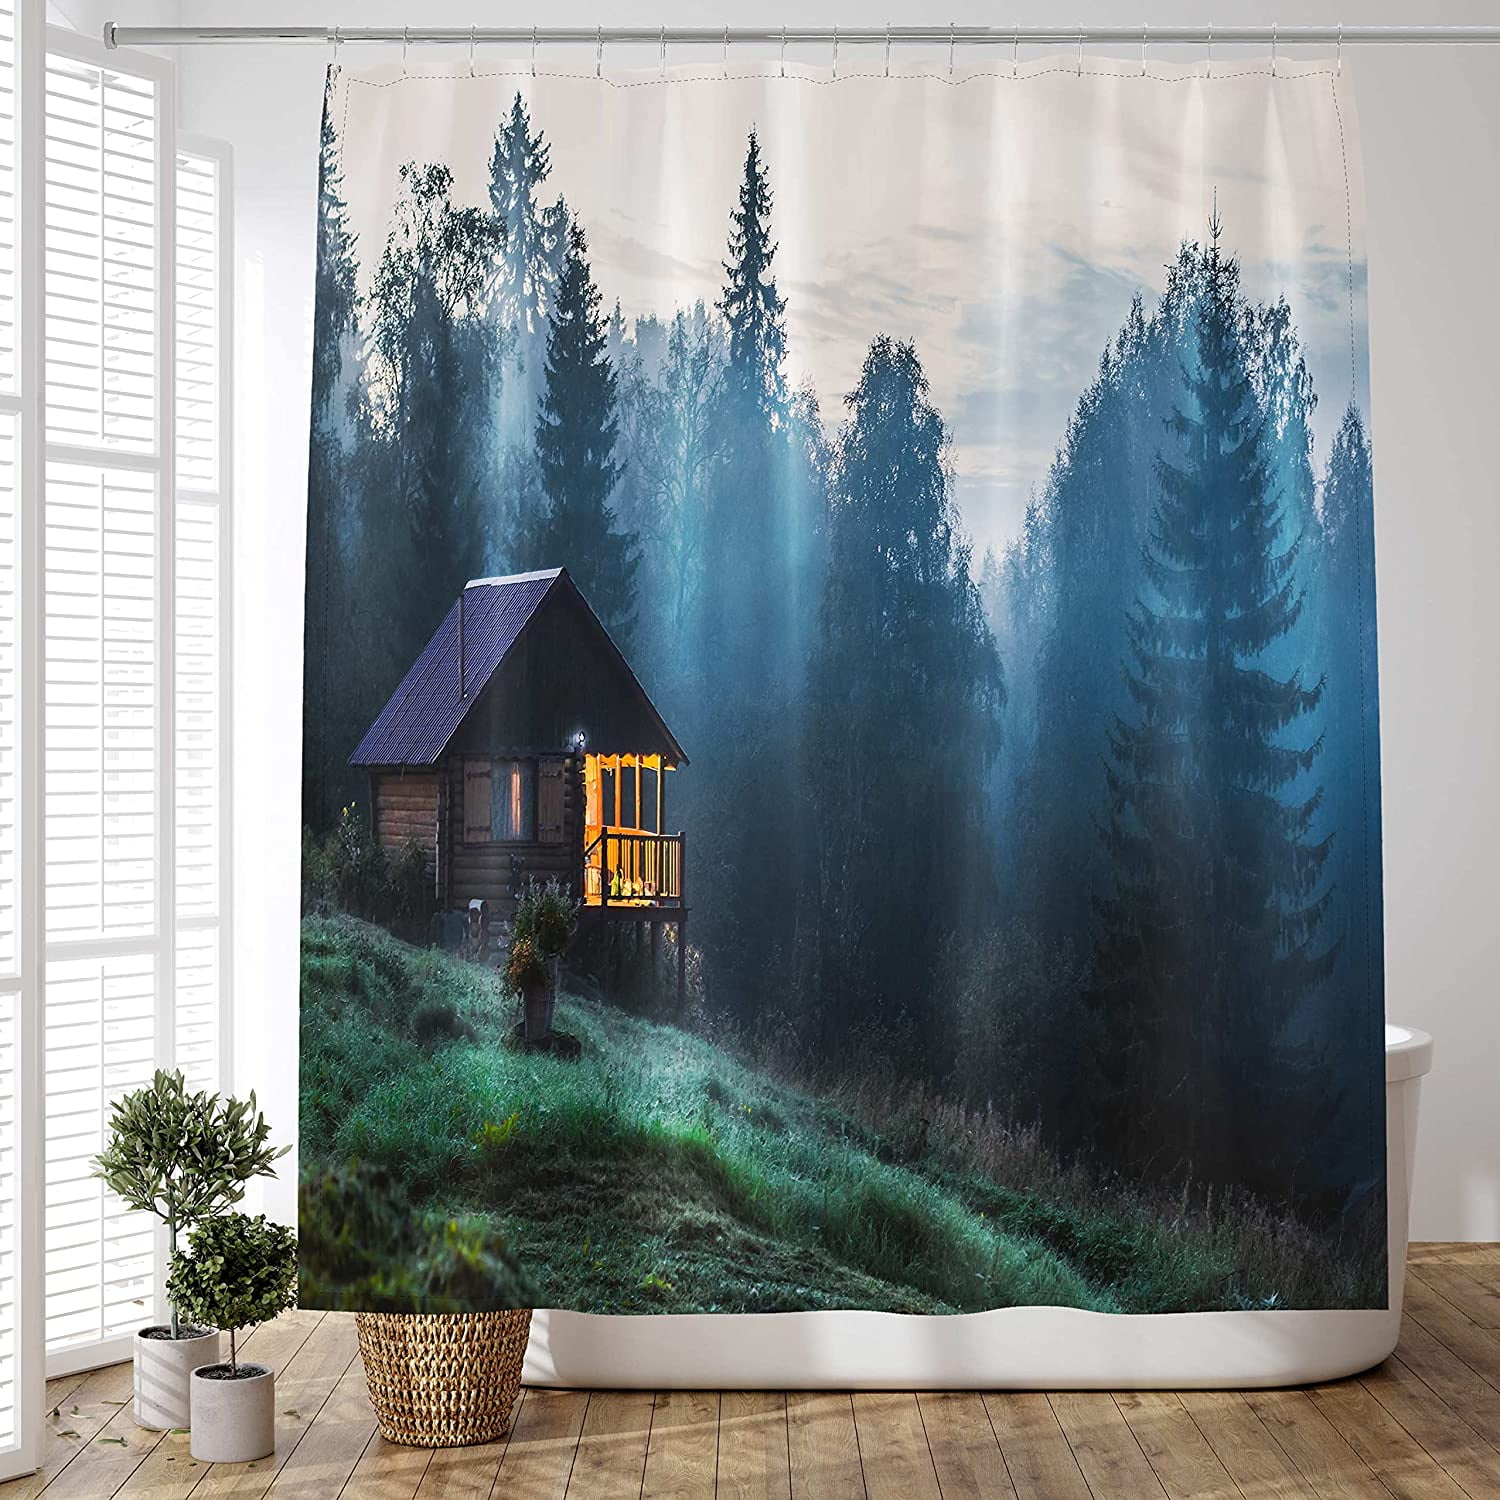 Details about   Spring Nature Animals Deers Flowers Forest Shower Curtain Set Bathroom Decor 72" 